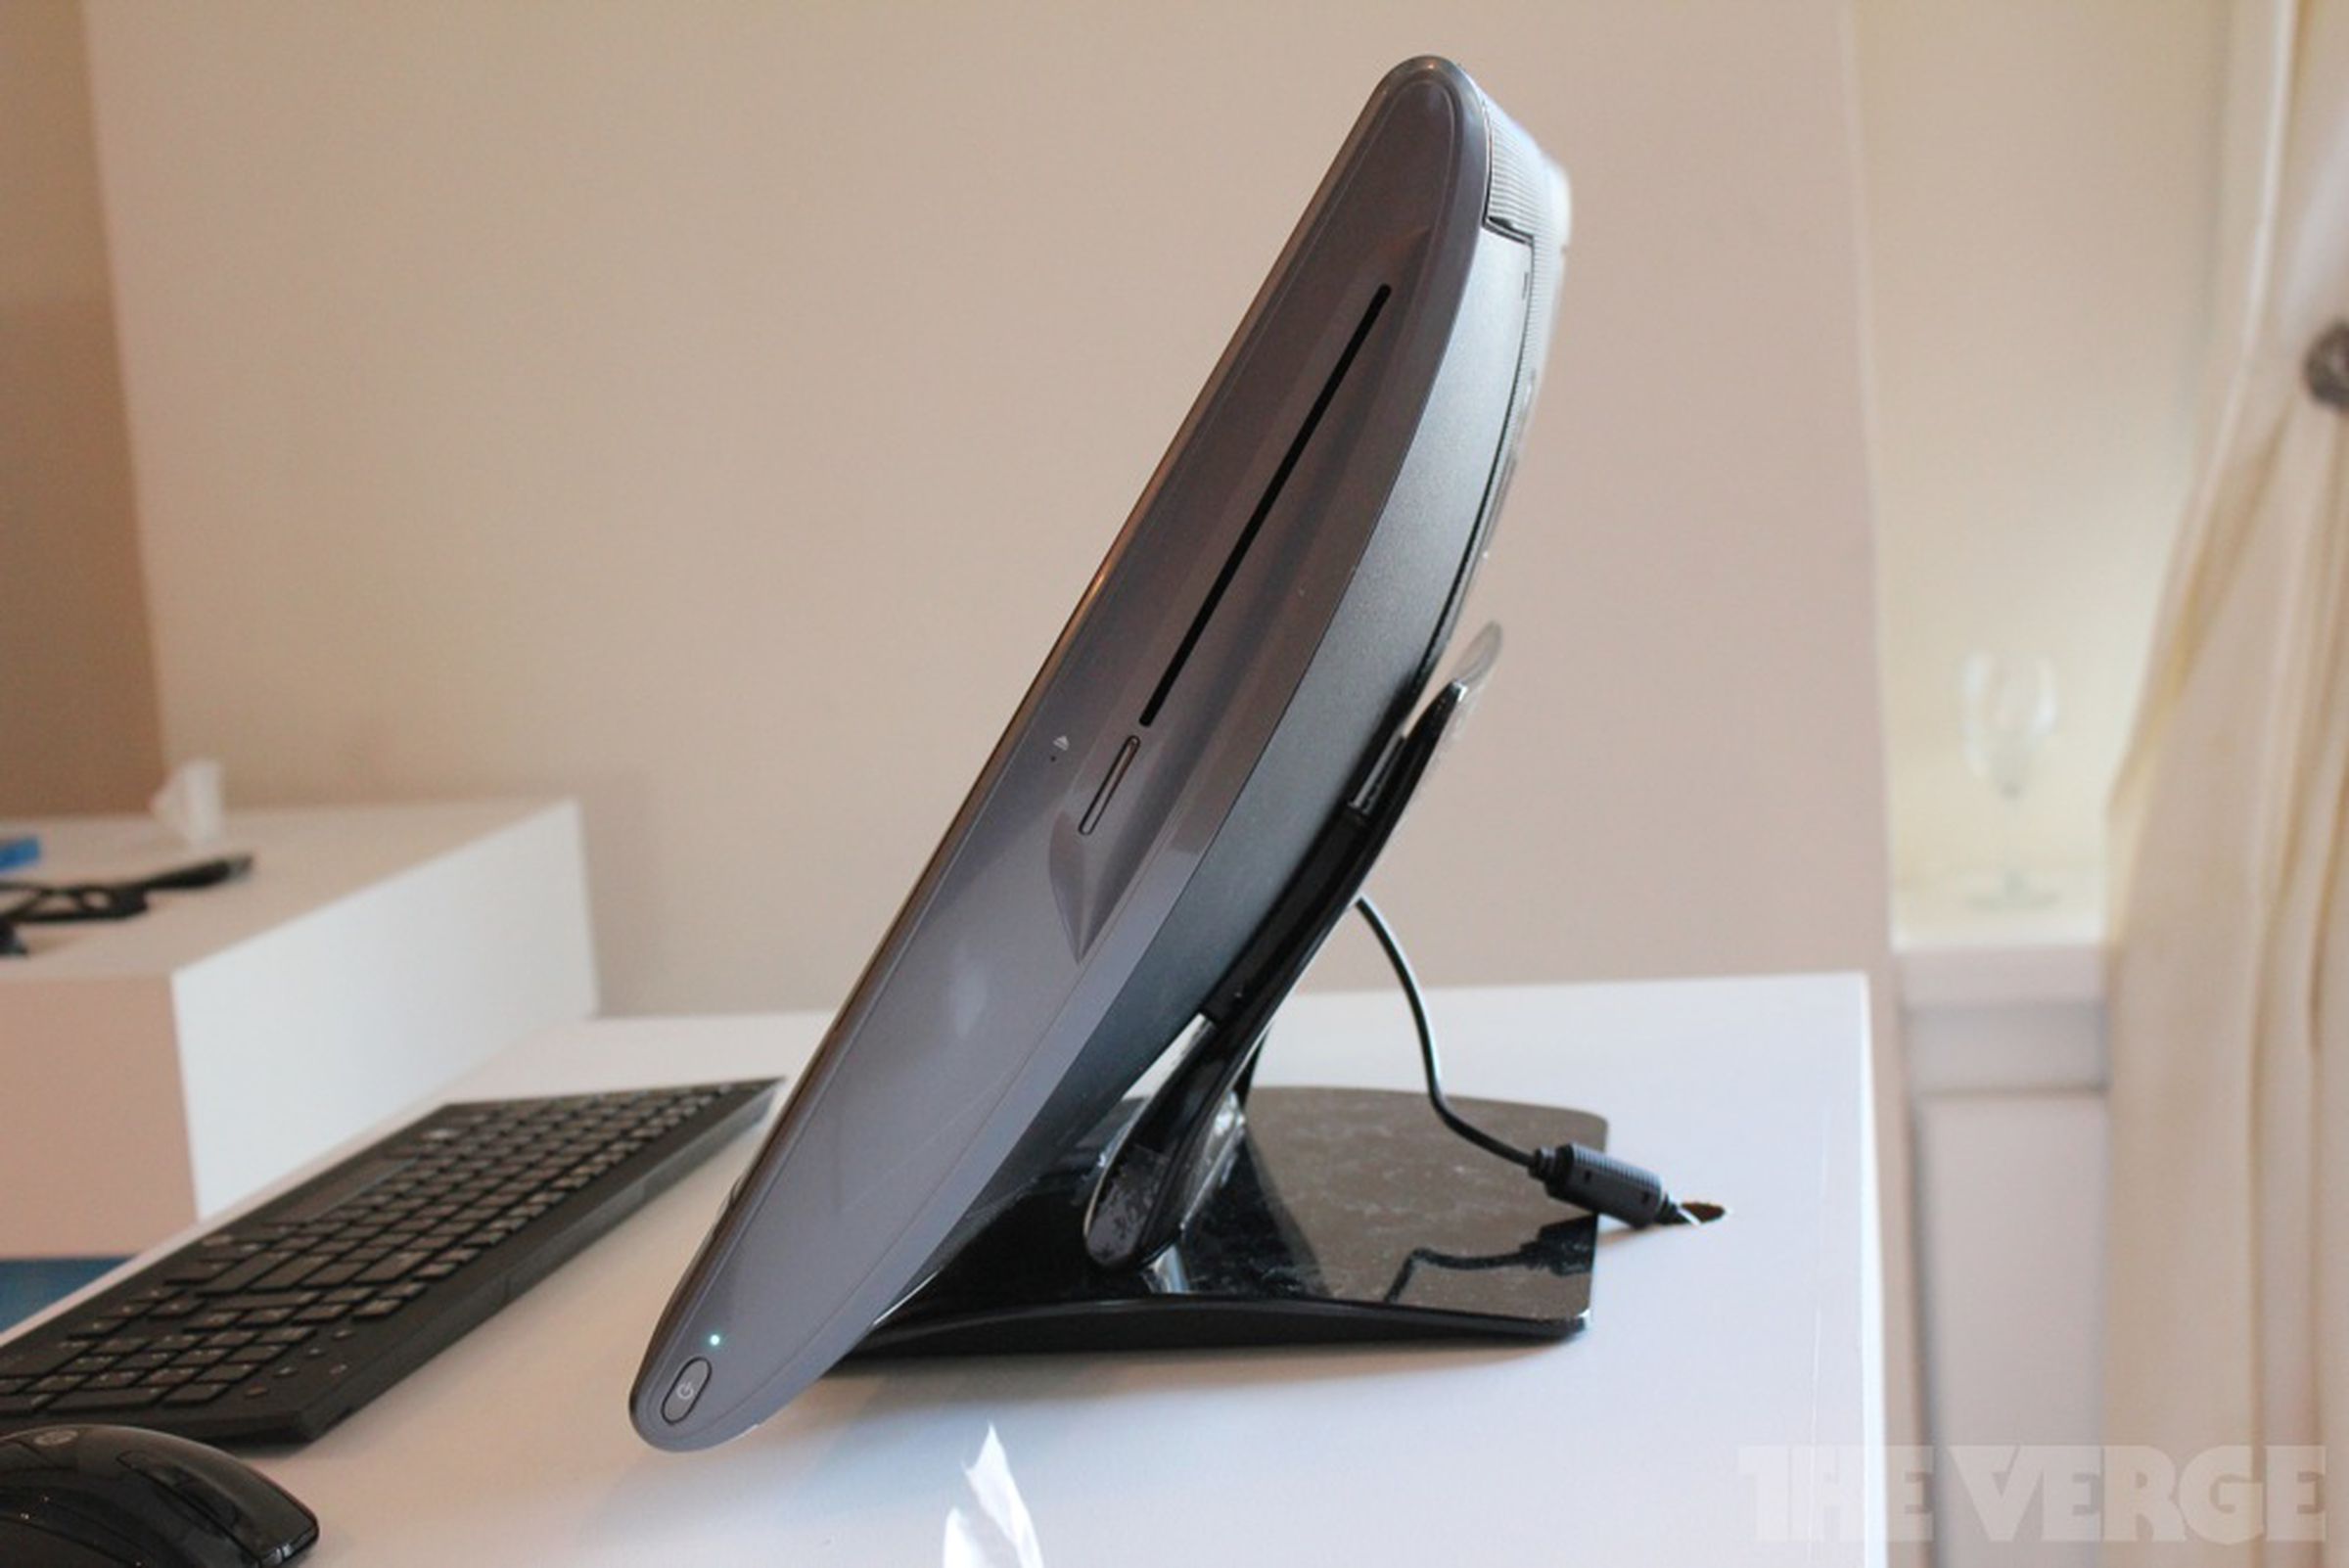 HP TouchSmart 620 3D and HP 2311gt 3D monitor hands-on photos